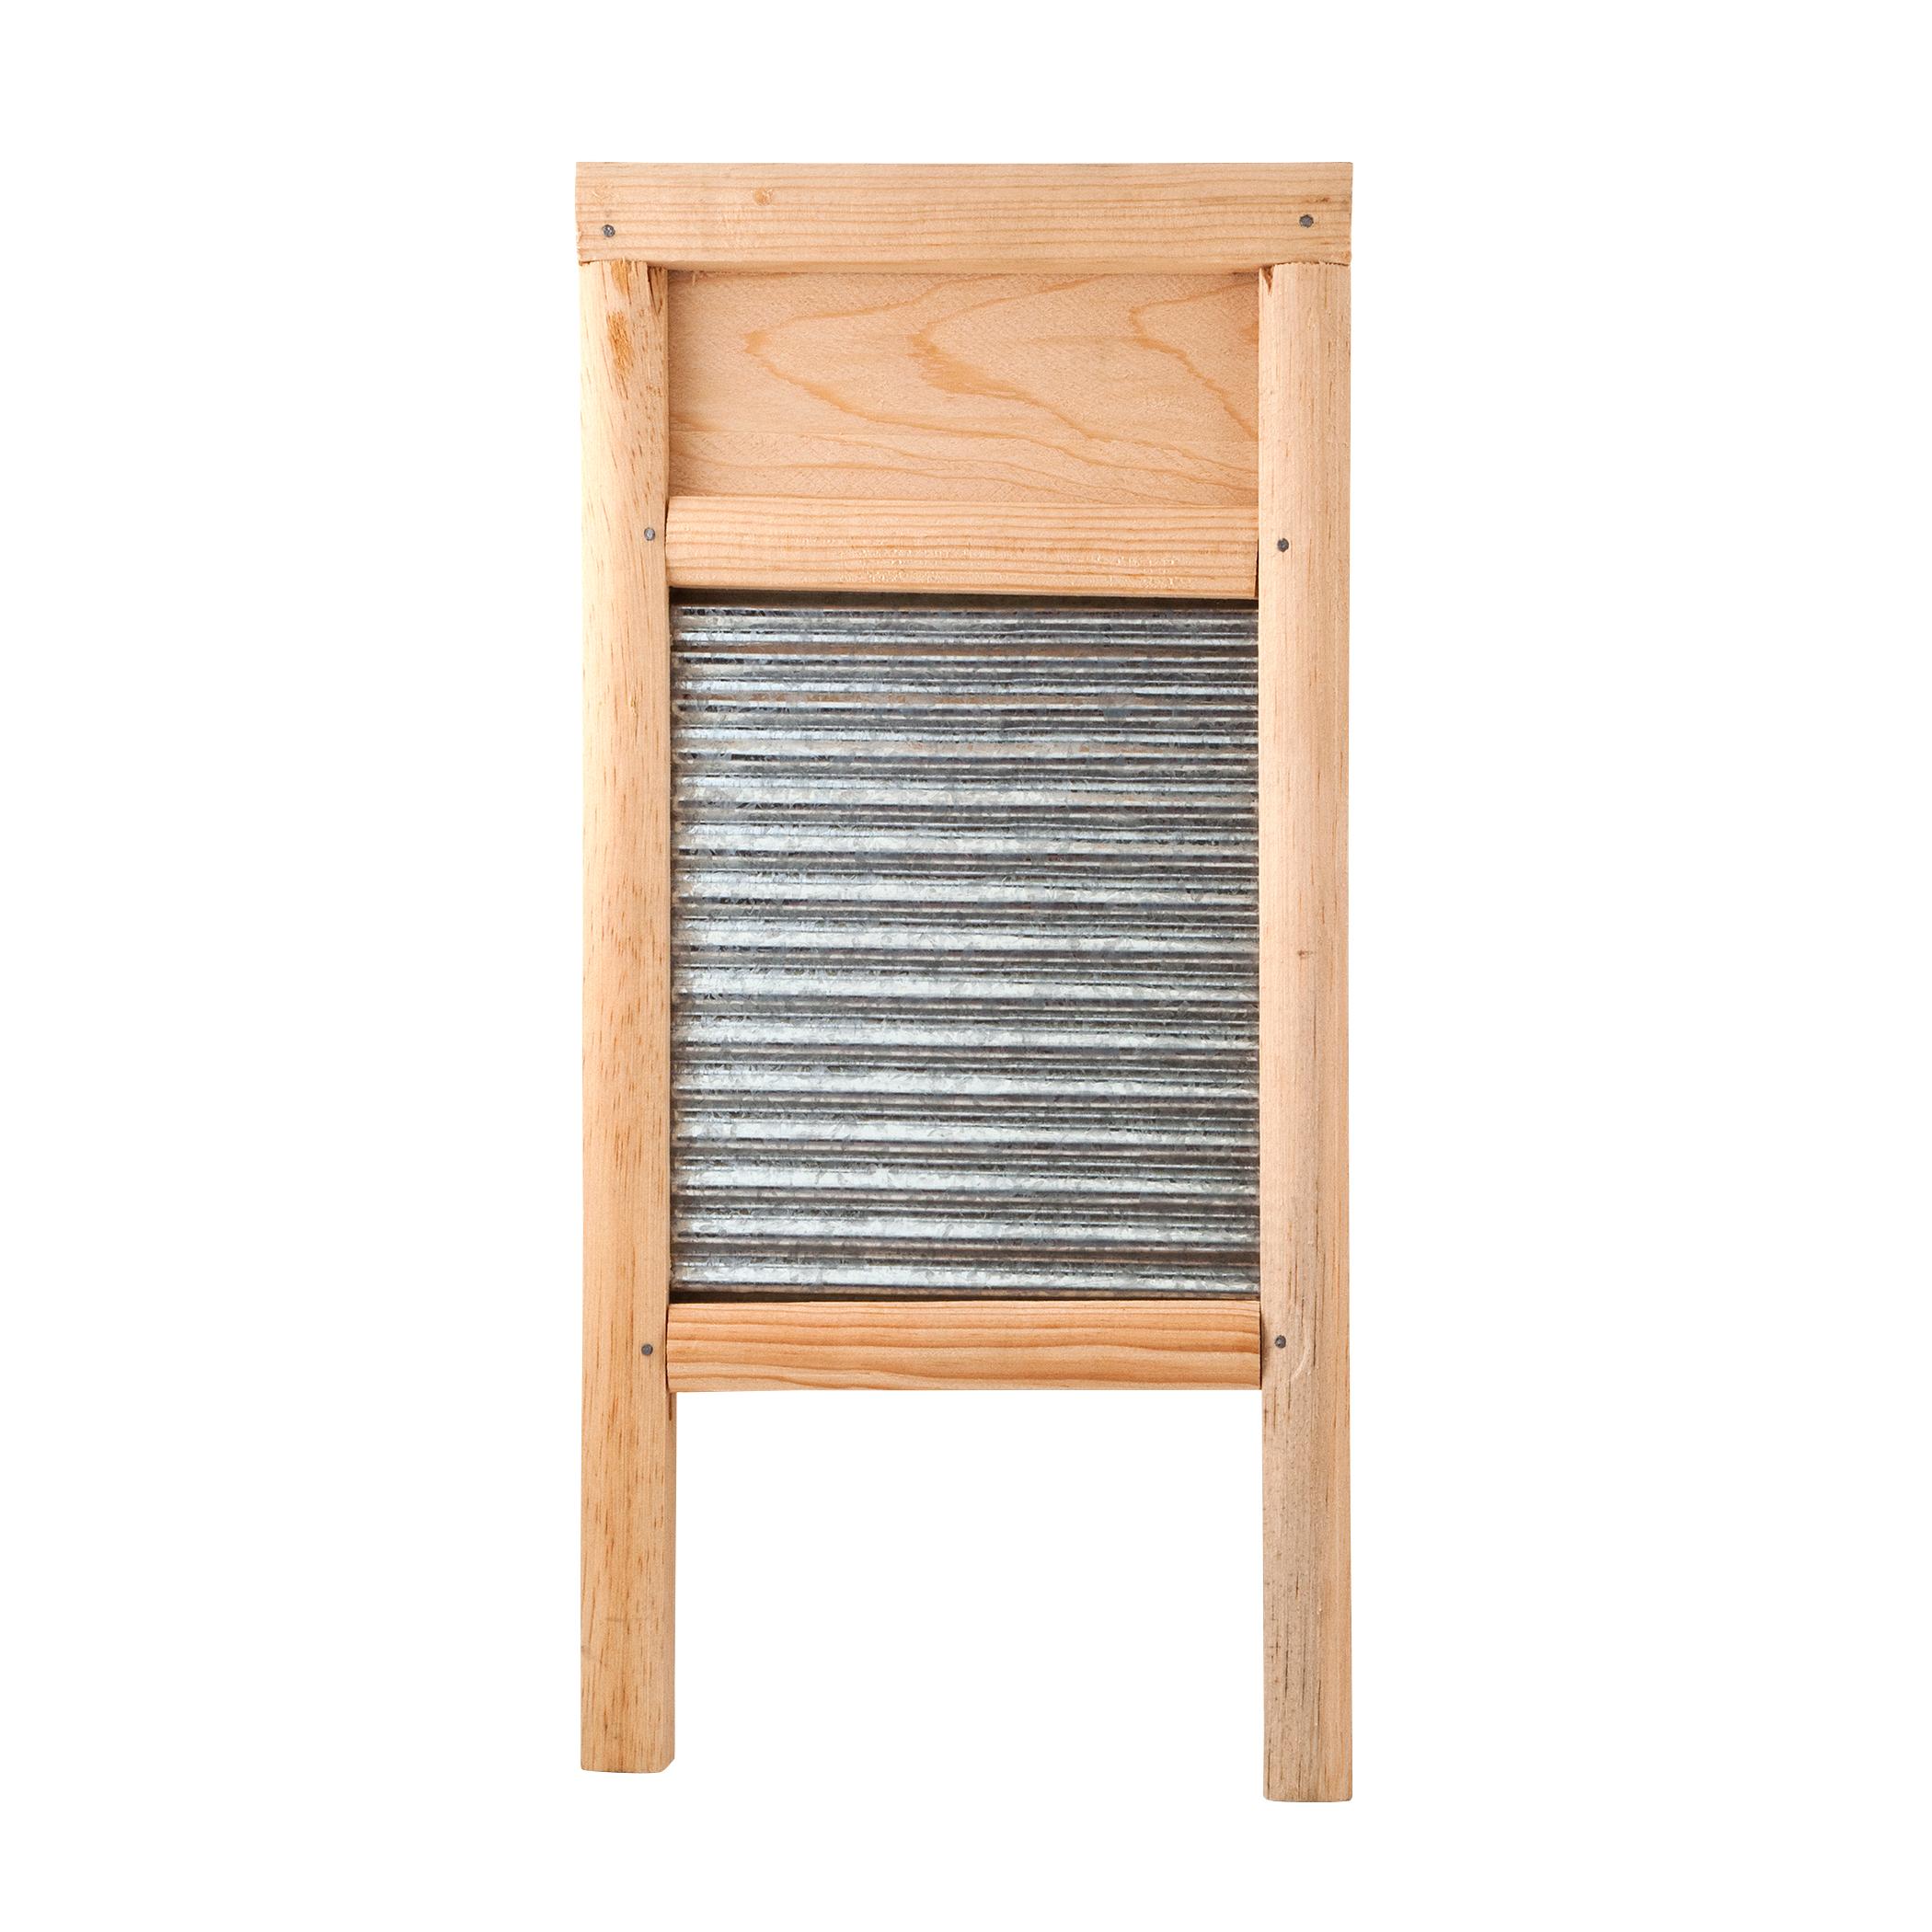  Washboard With Wood Frame - Small